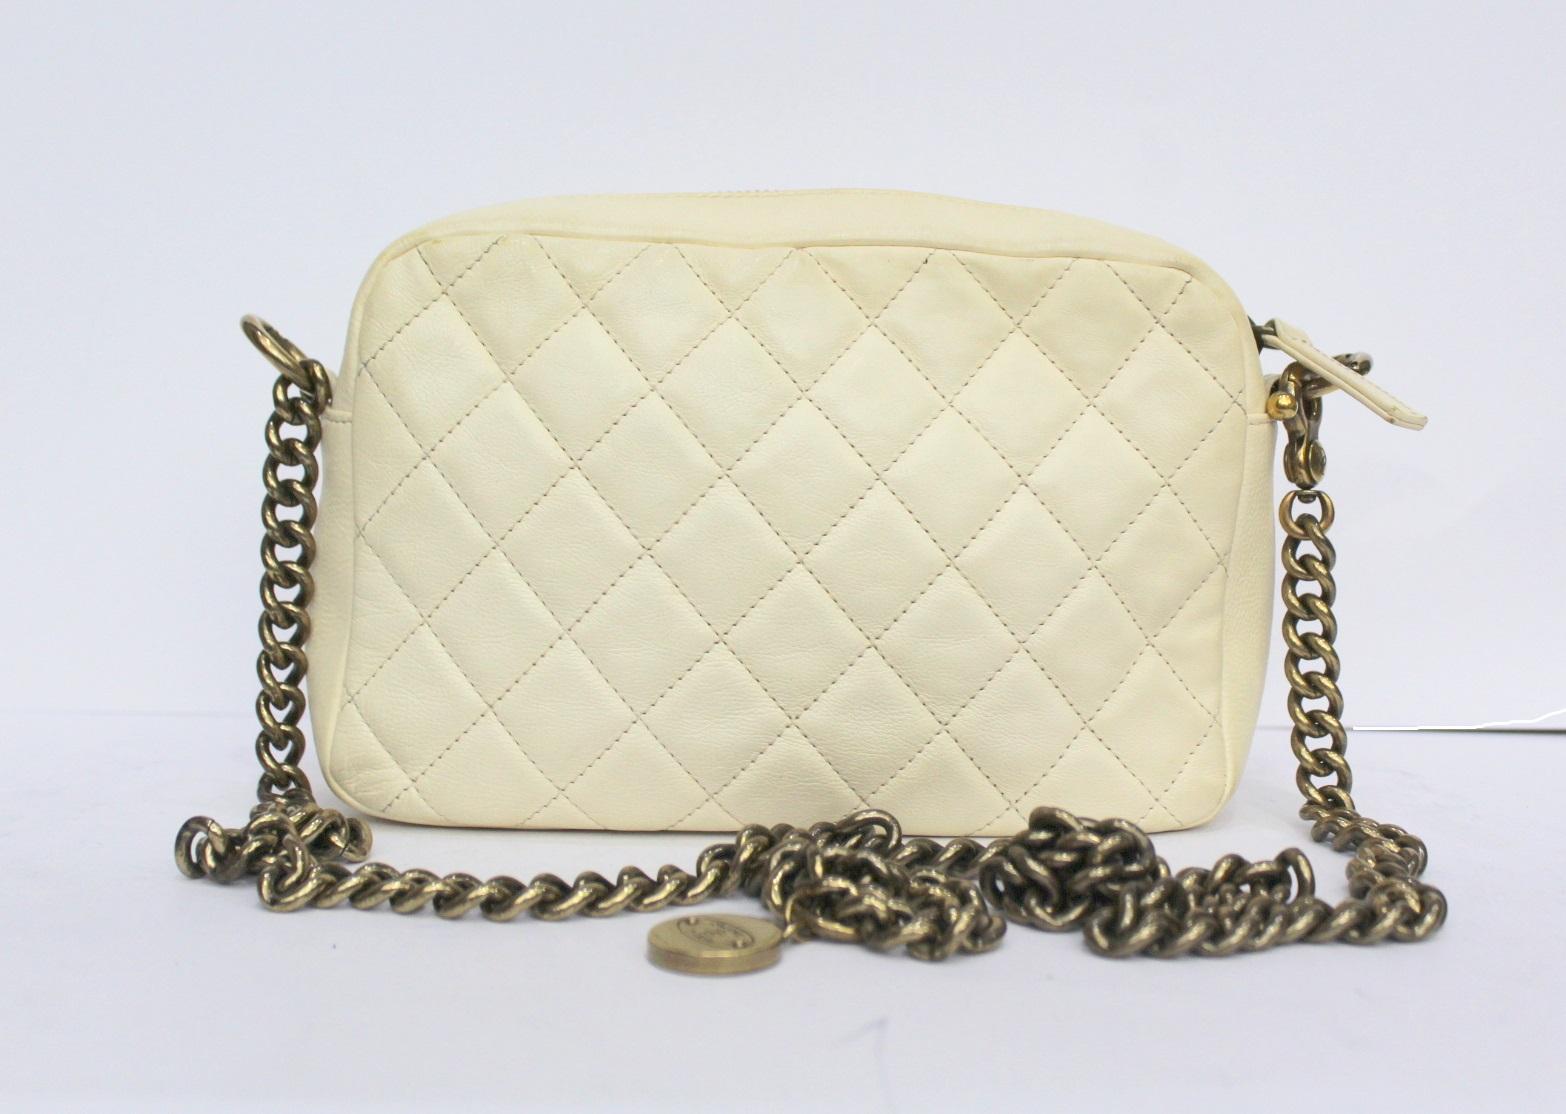 Fantastic Chanel Camera Bag made of white leather with gold hardware. Zip closure, internally roomy for the essentials.
Chain shoulder strap that allows you to wear it comfortably. Enriched on the front by the classic CC logo.
Year 2012/2013 is in